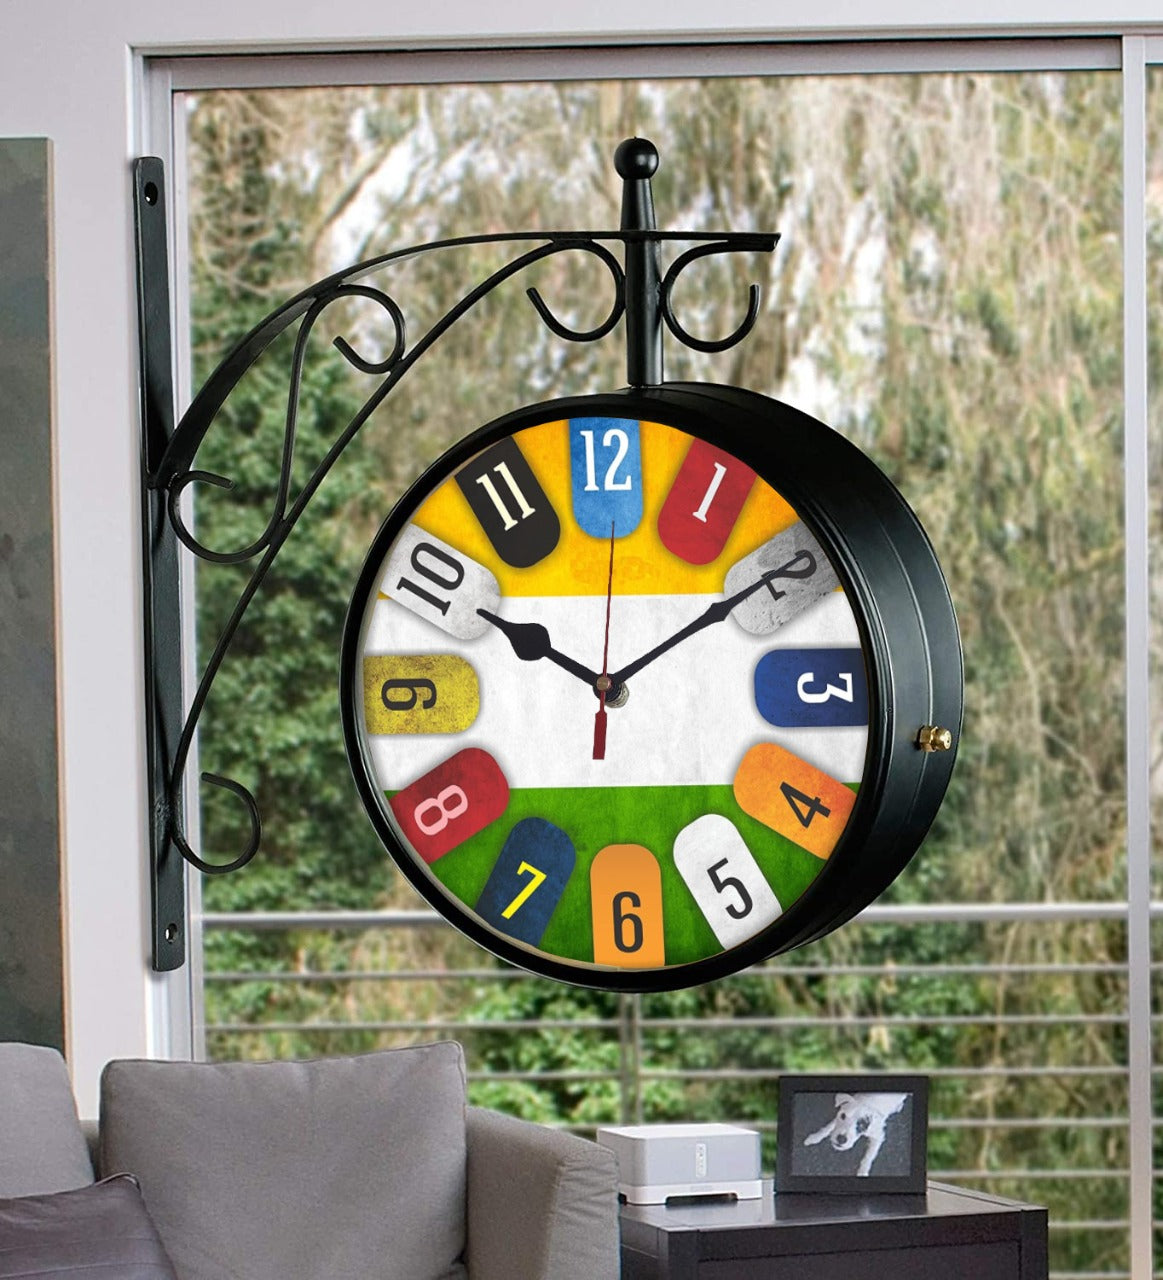 Station Clock With COntemporary Dial design - double sided display